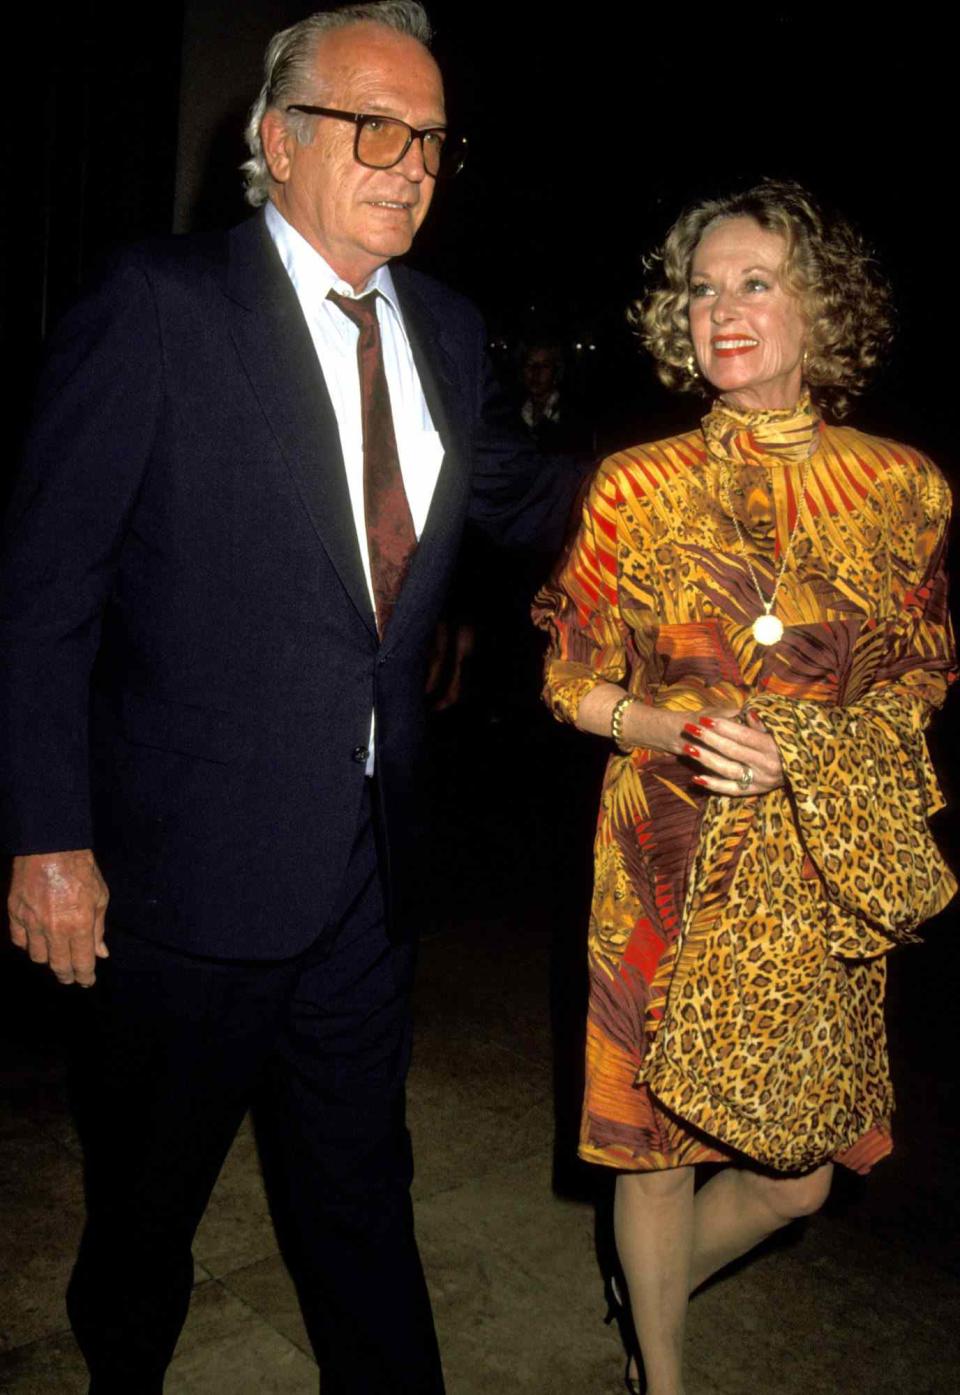 <p>Here, Hedren looks radiant in her trademark animal print in 1992 alongside her third husband, Luis Barrenechea, at a Benefit for the Scott Newman Center honoring George Schlatter in Beverly Hills. </p>